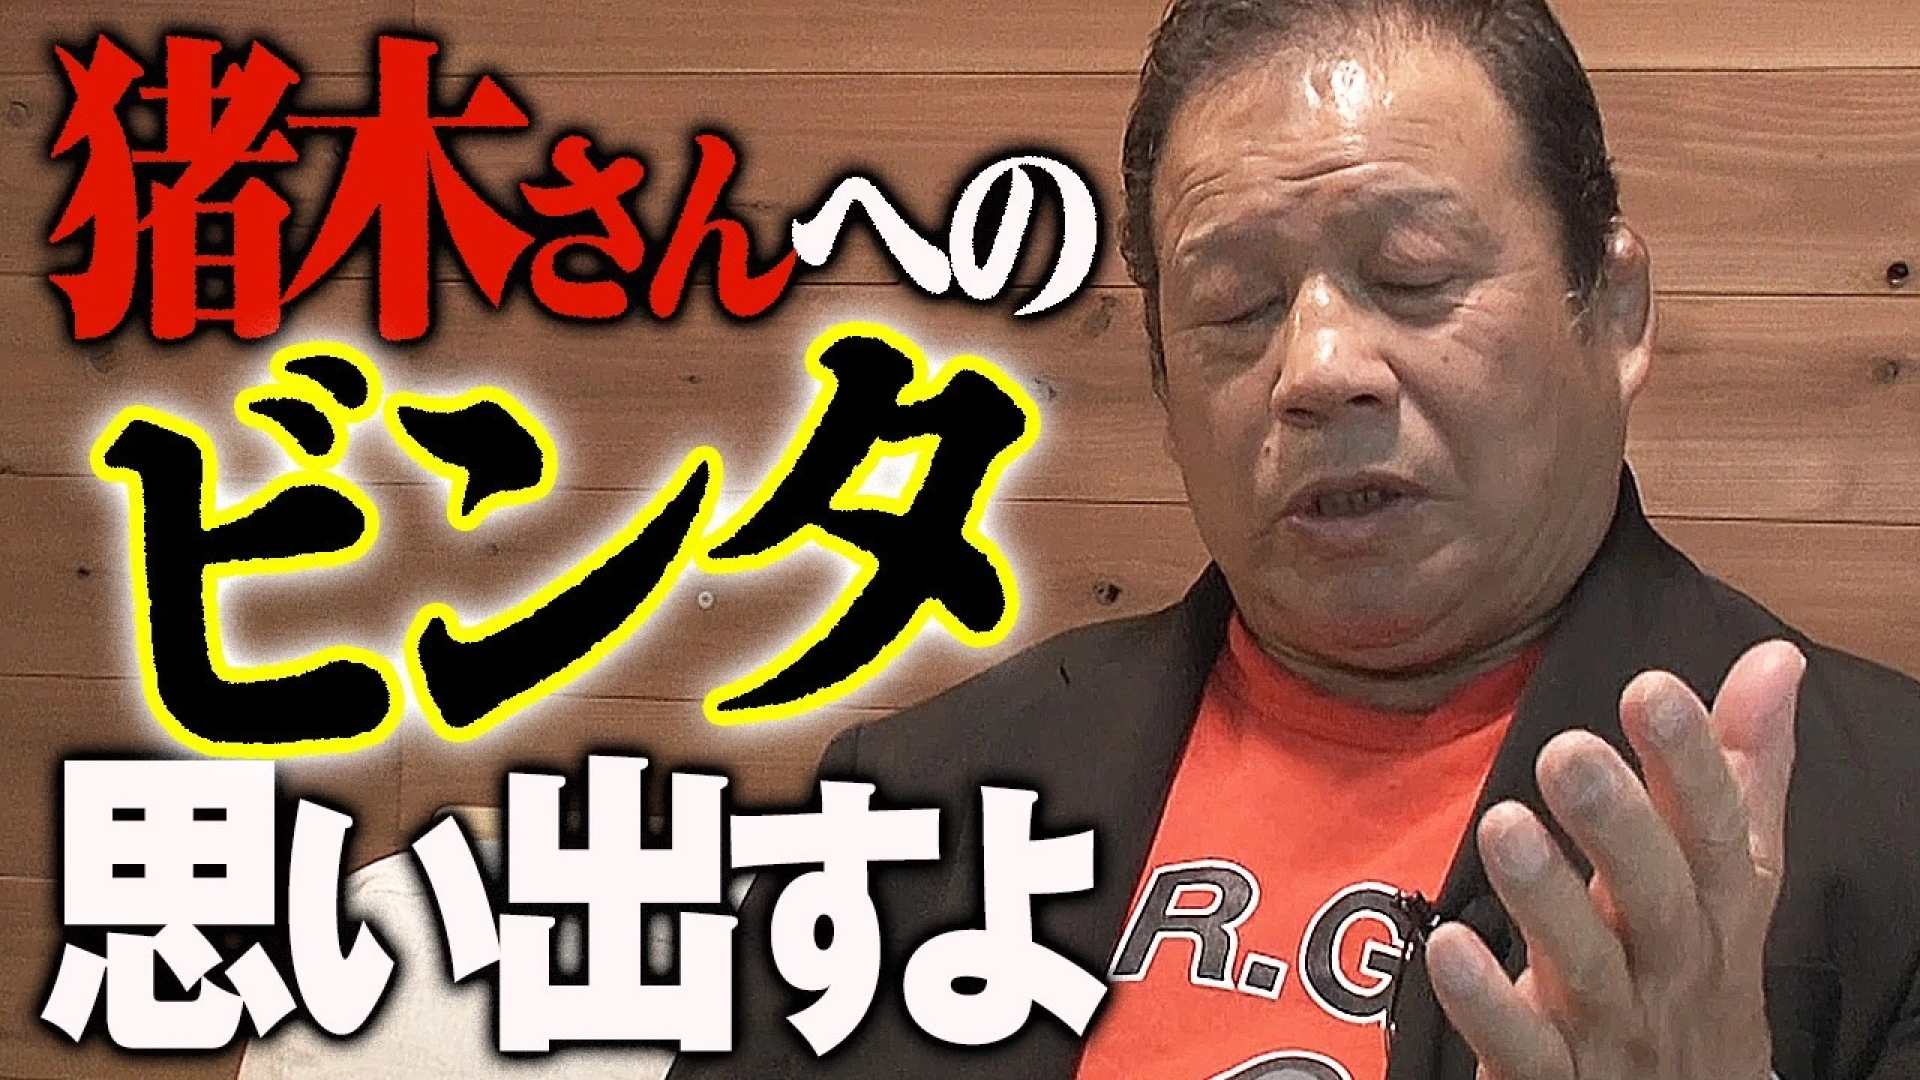 Pro Wrestling Legend Tatsumi Fujinami Clears The Air On His Feelings For Manabu Soya